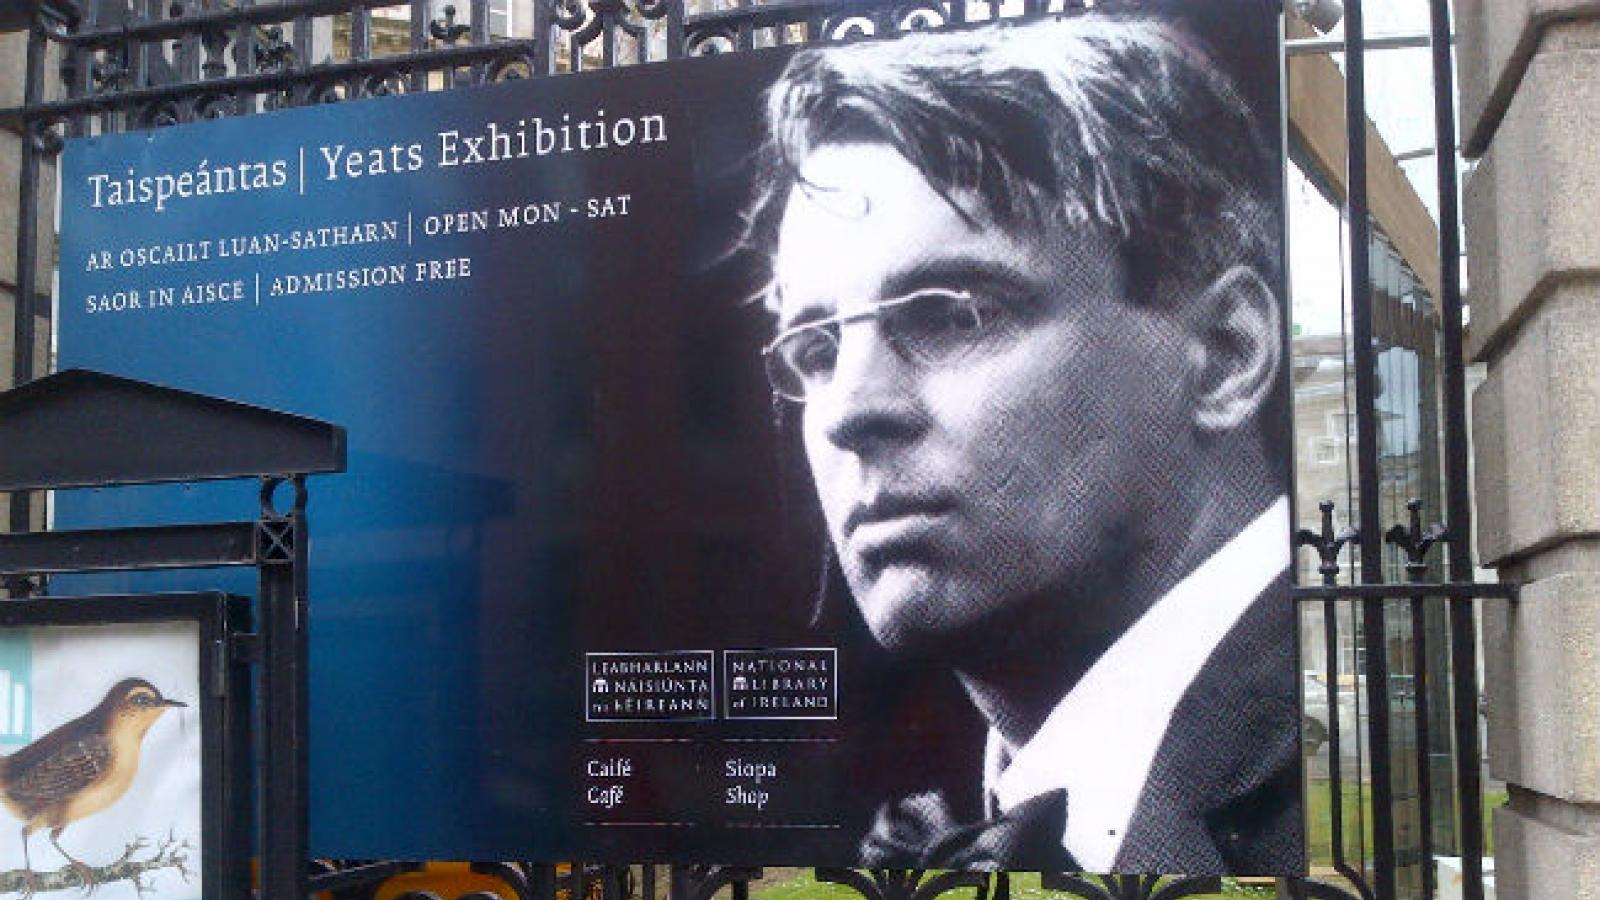 Poster advertising exhibit about W.B. Yeats